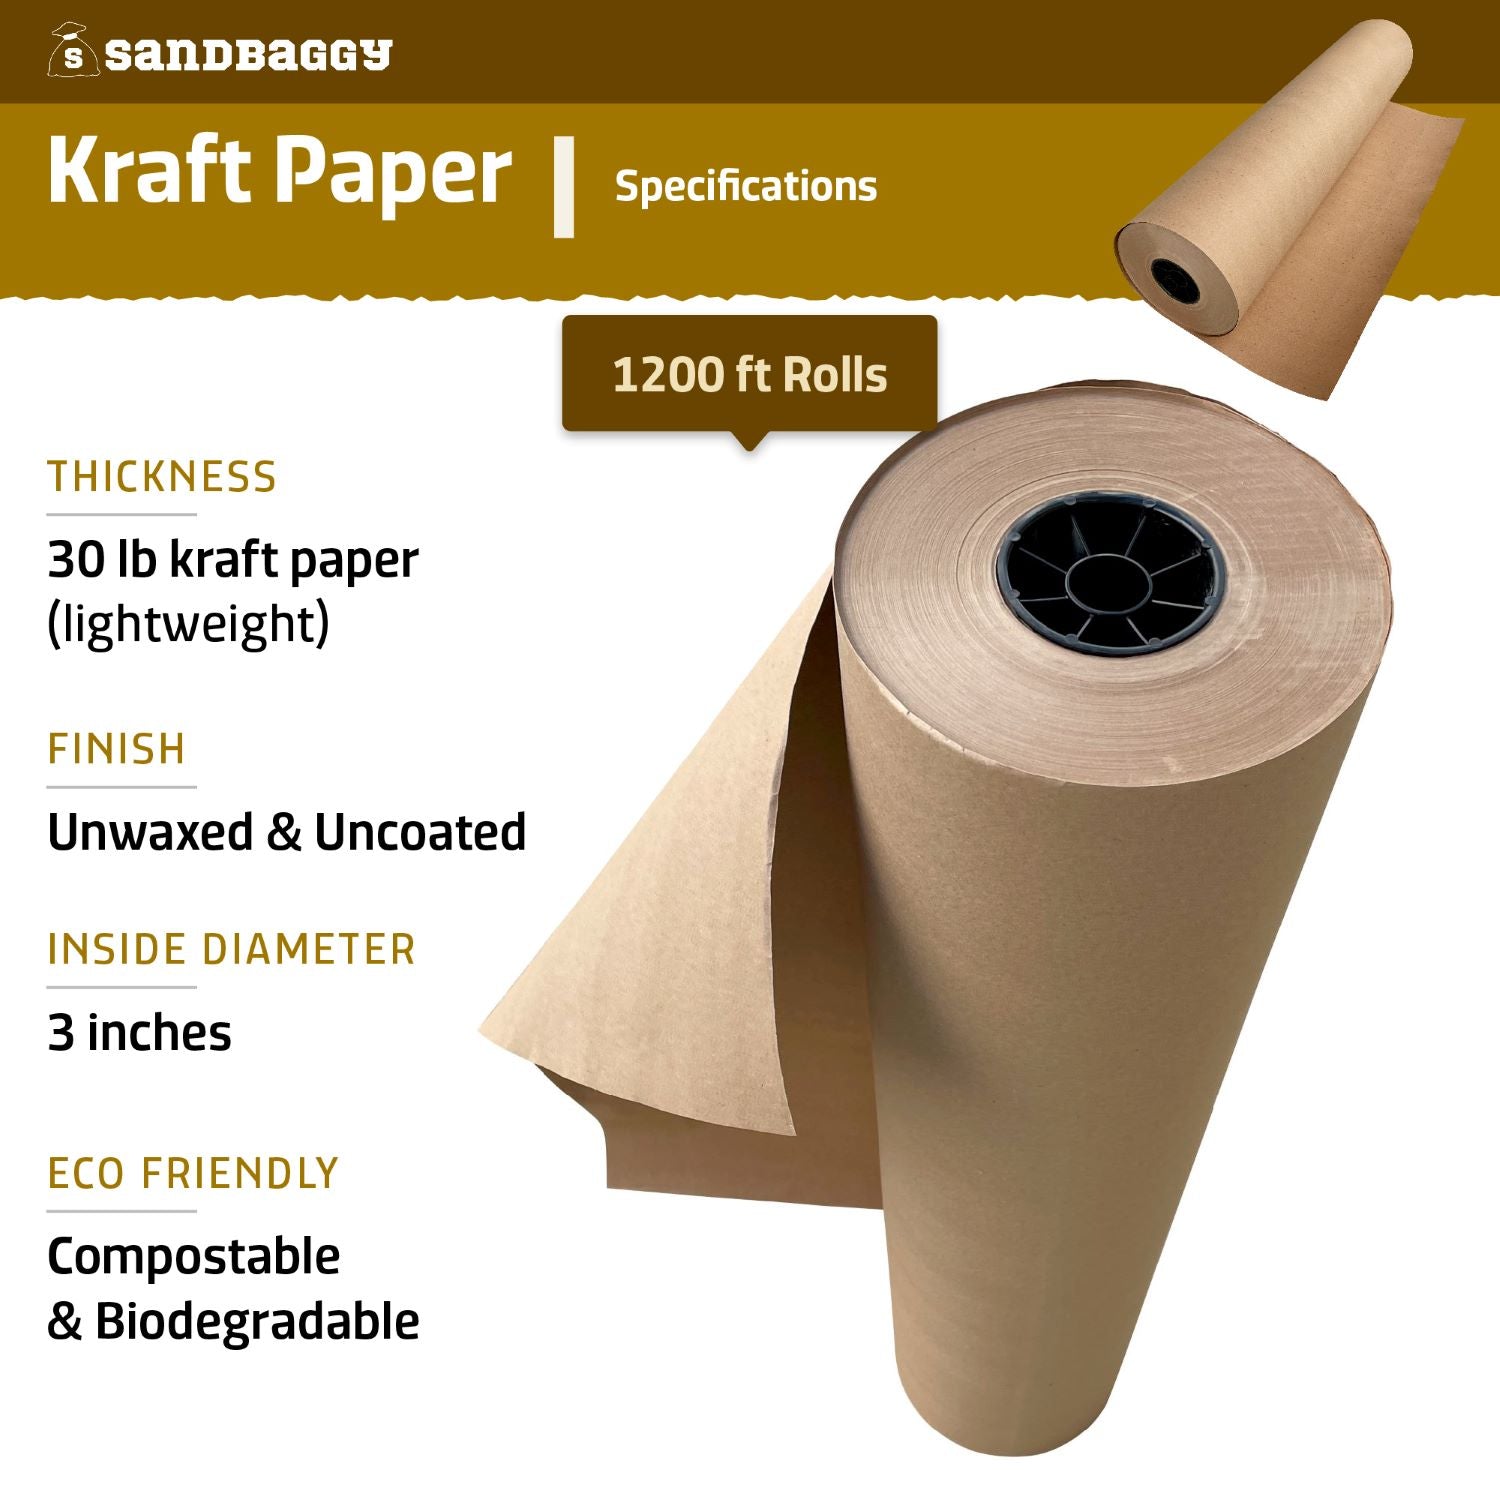 Recycled Tissue Wrapping Paper, 150 Sheets